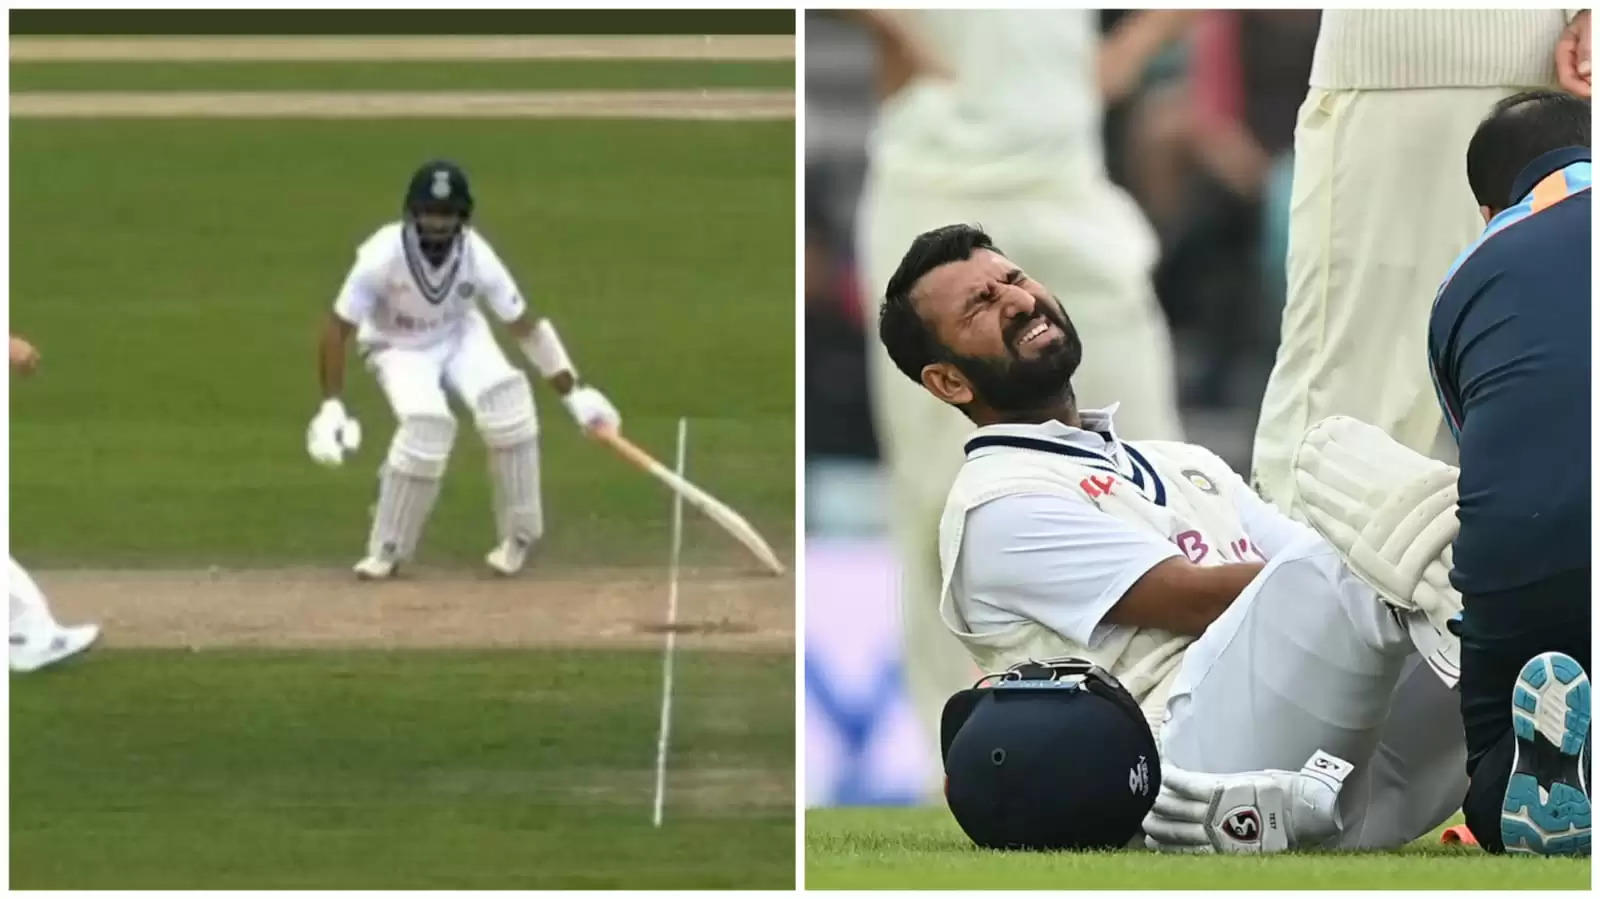 Watch: Pujara twists ankle; braves the injury to bat on